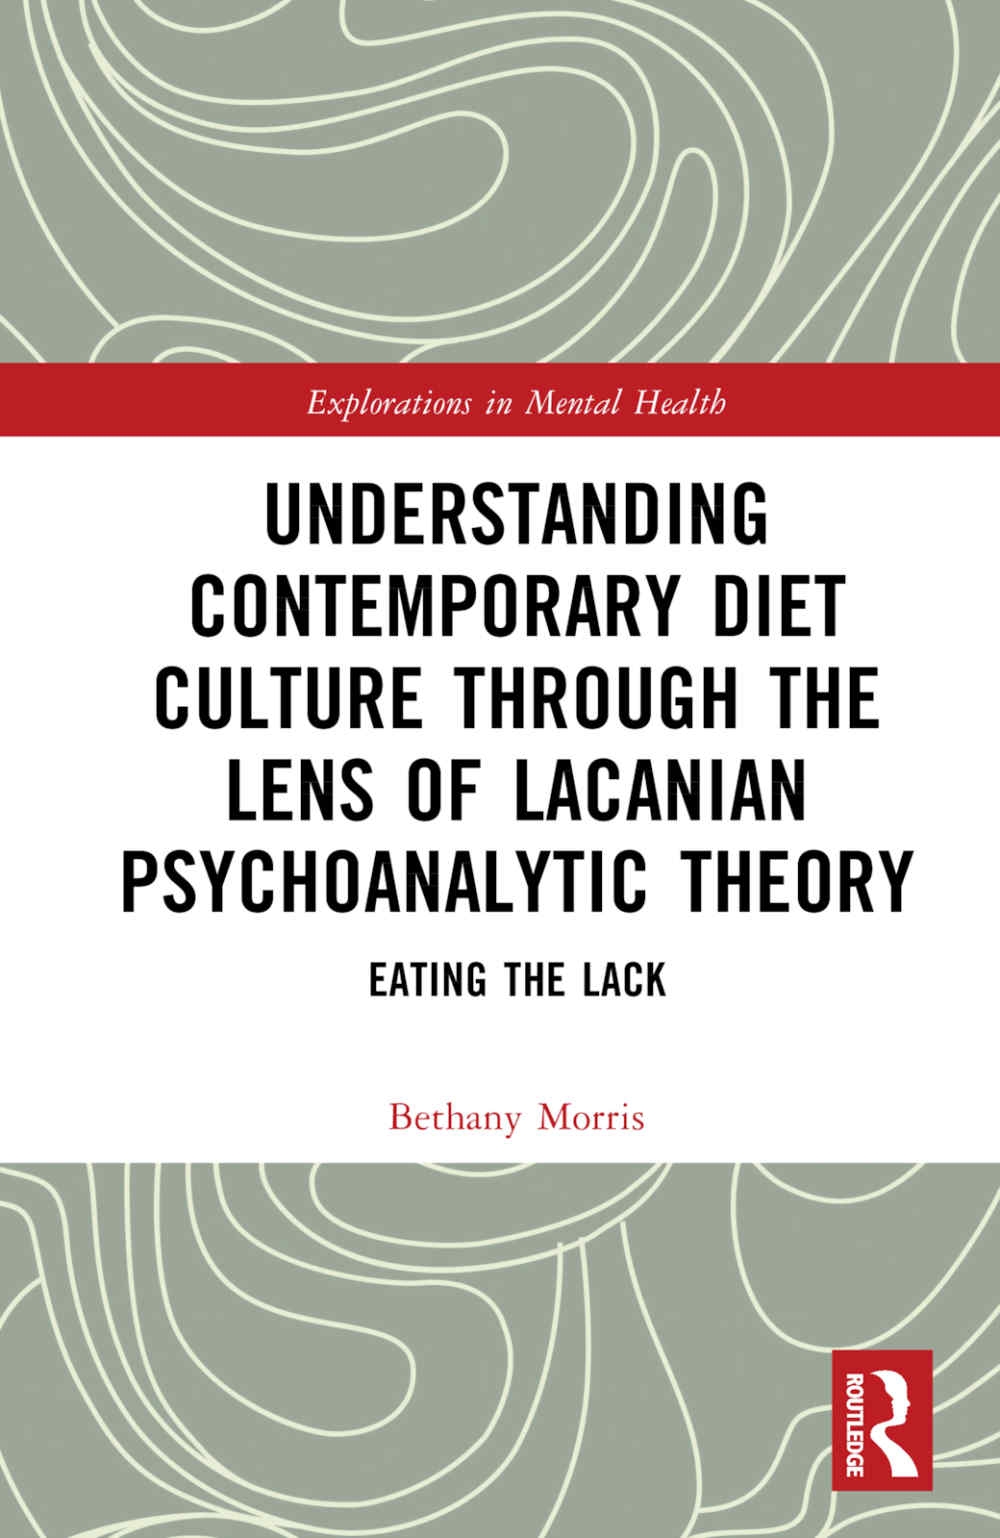 Understanding Contemporary Diet Culture Through the Lens of Lacanian Psychoanalytic Theory: Eating the Lack